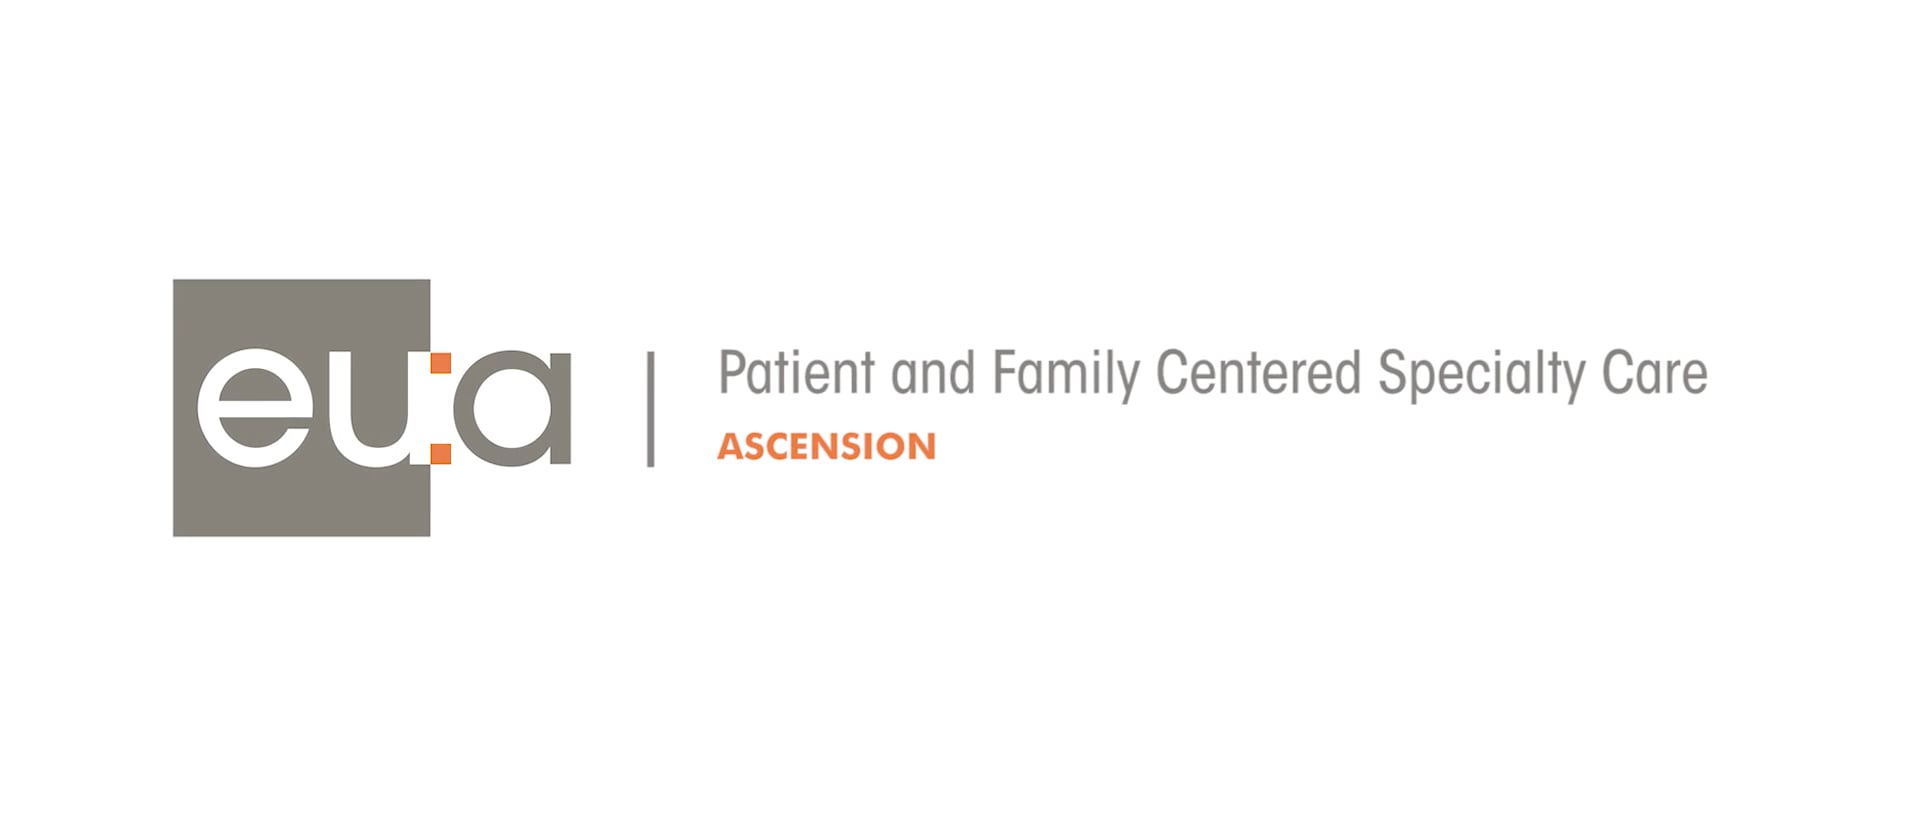 >Ascension | Patient and Family Centered Specialty Care